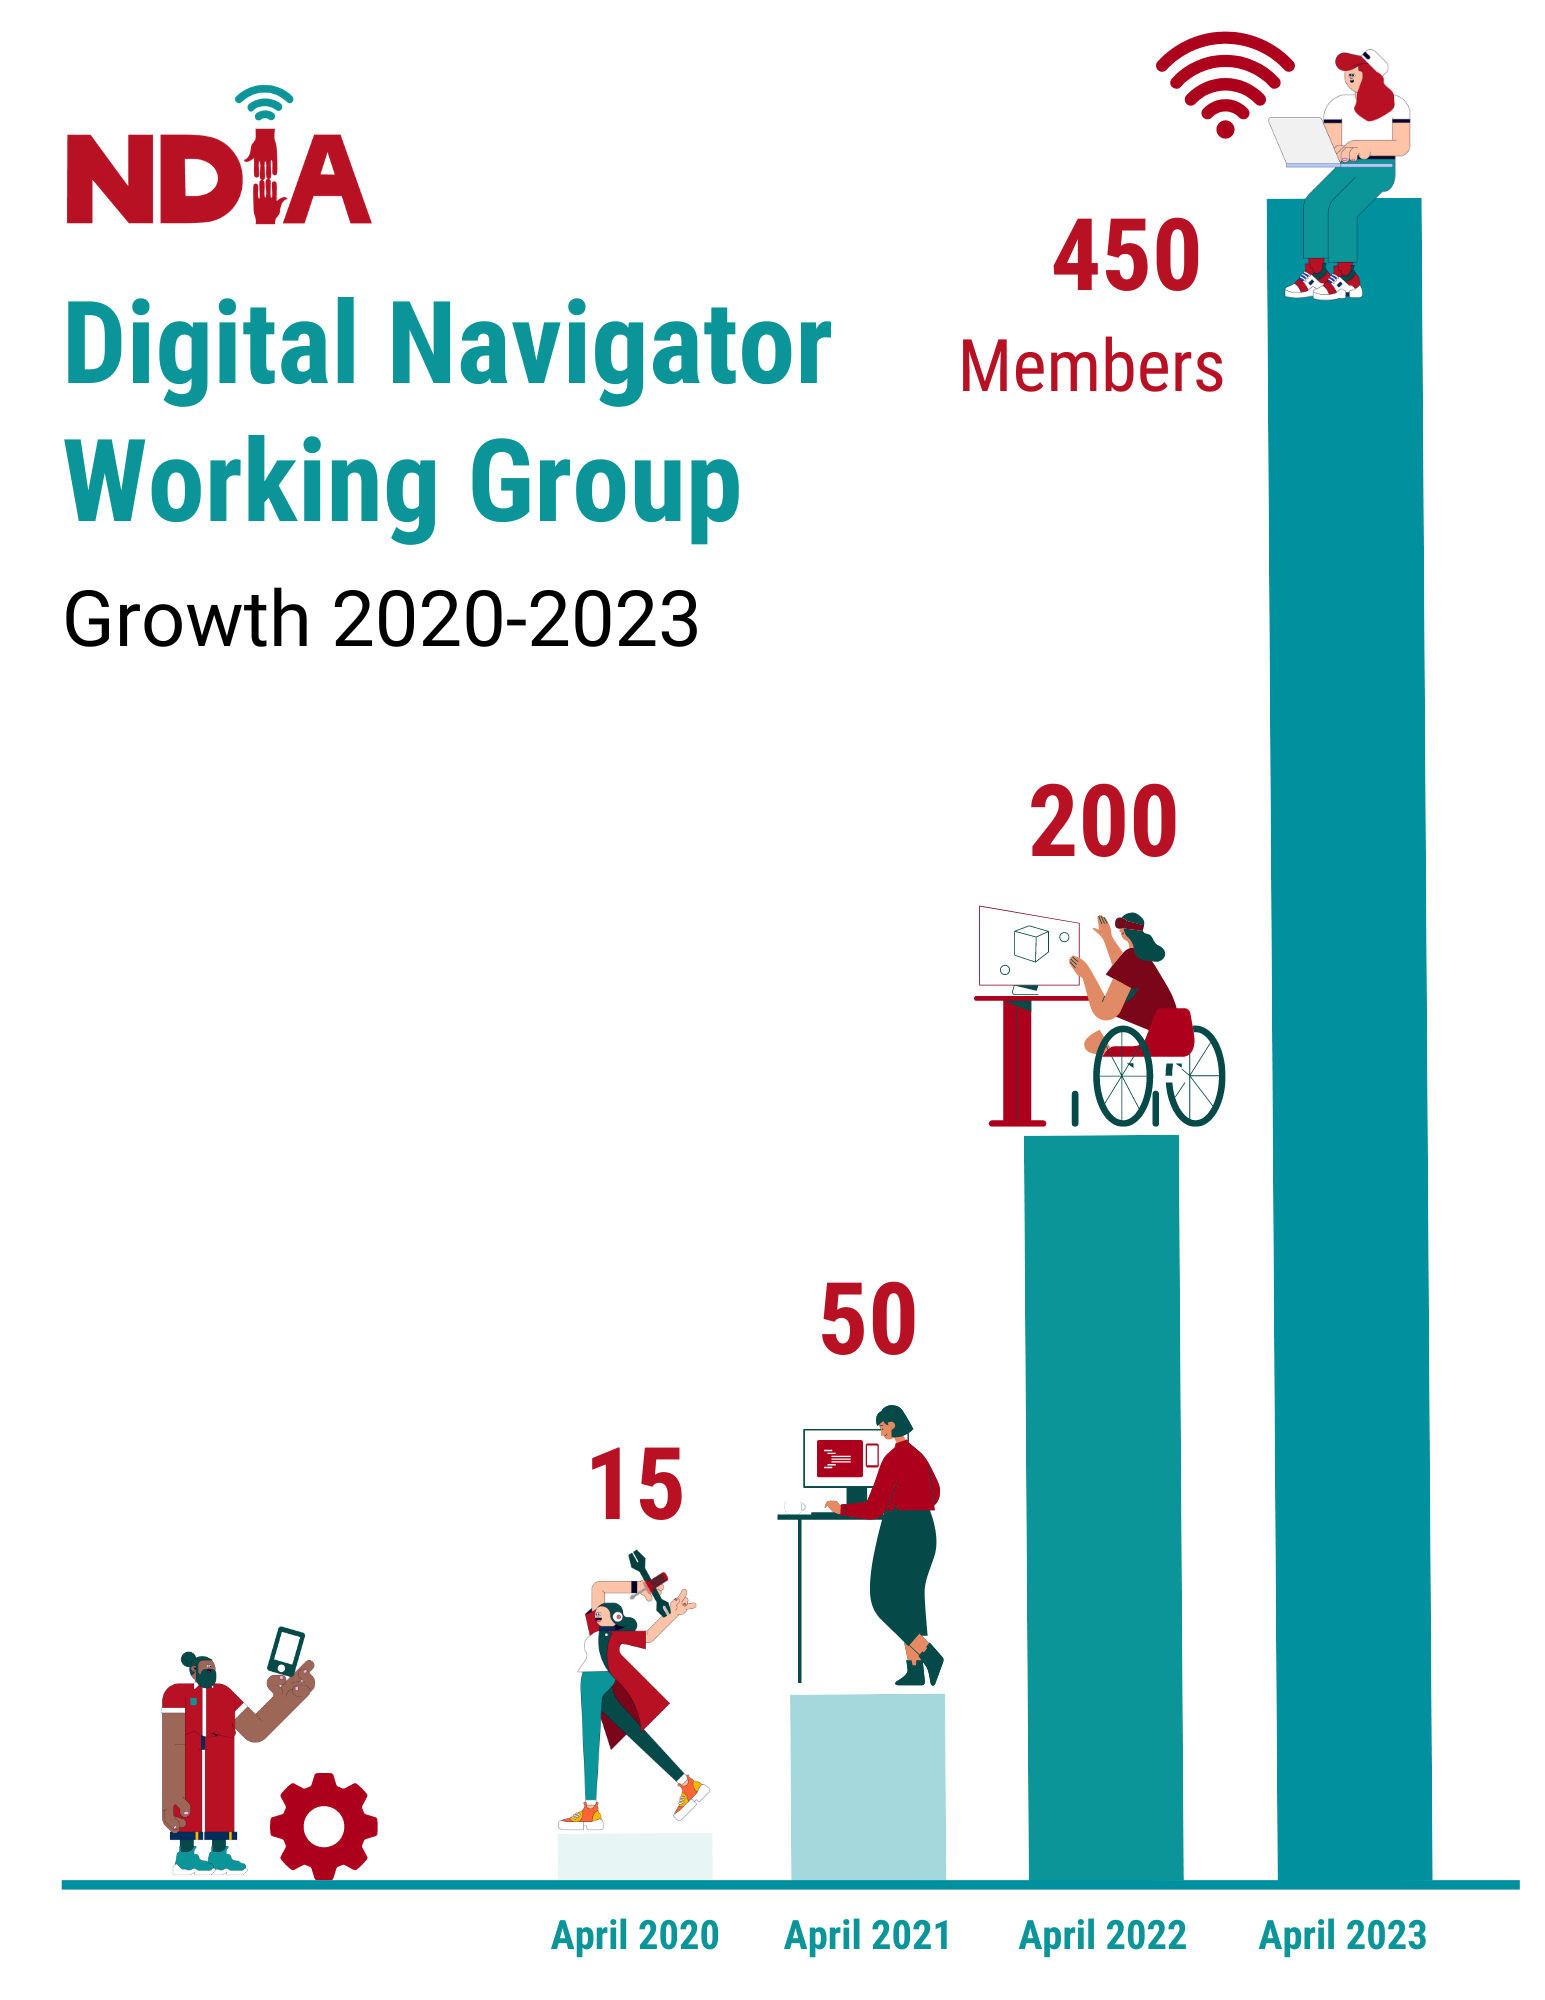 Bar graph shows Digital Navigator Working Group Growth 2020-23, from 15, to 50, to 200, and finally to 450 members in April 2023